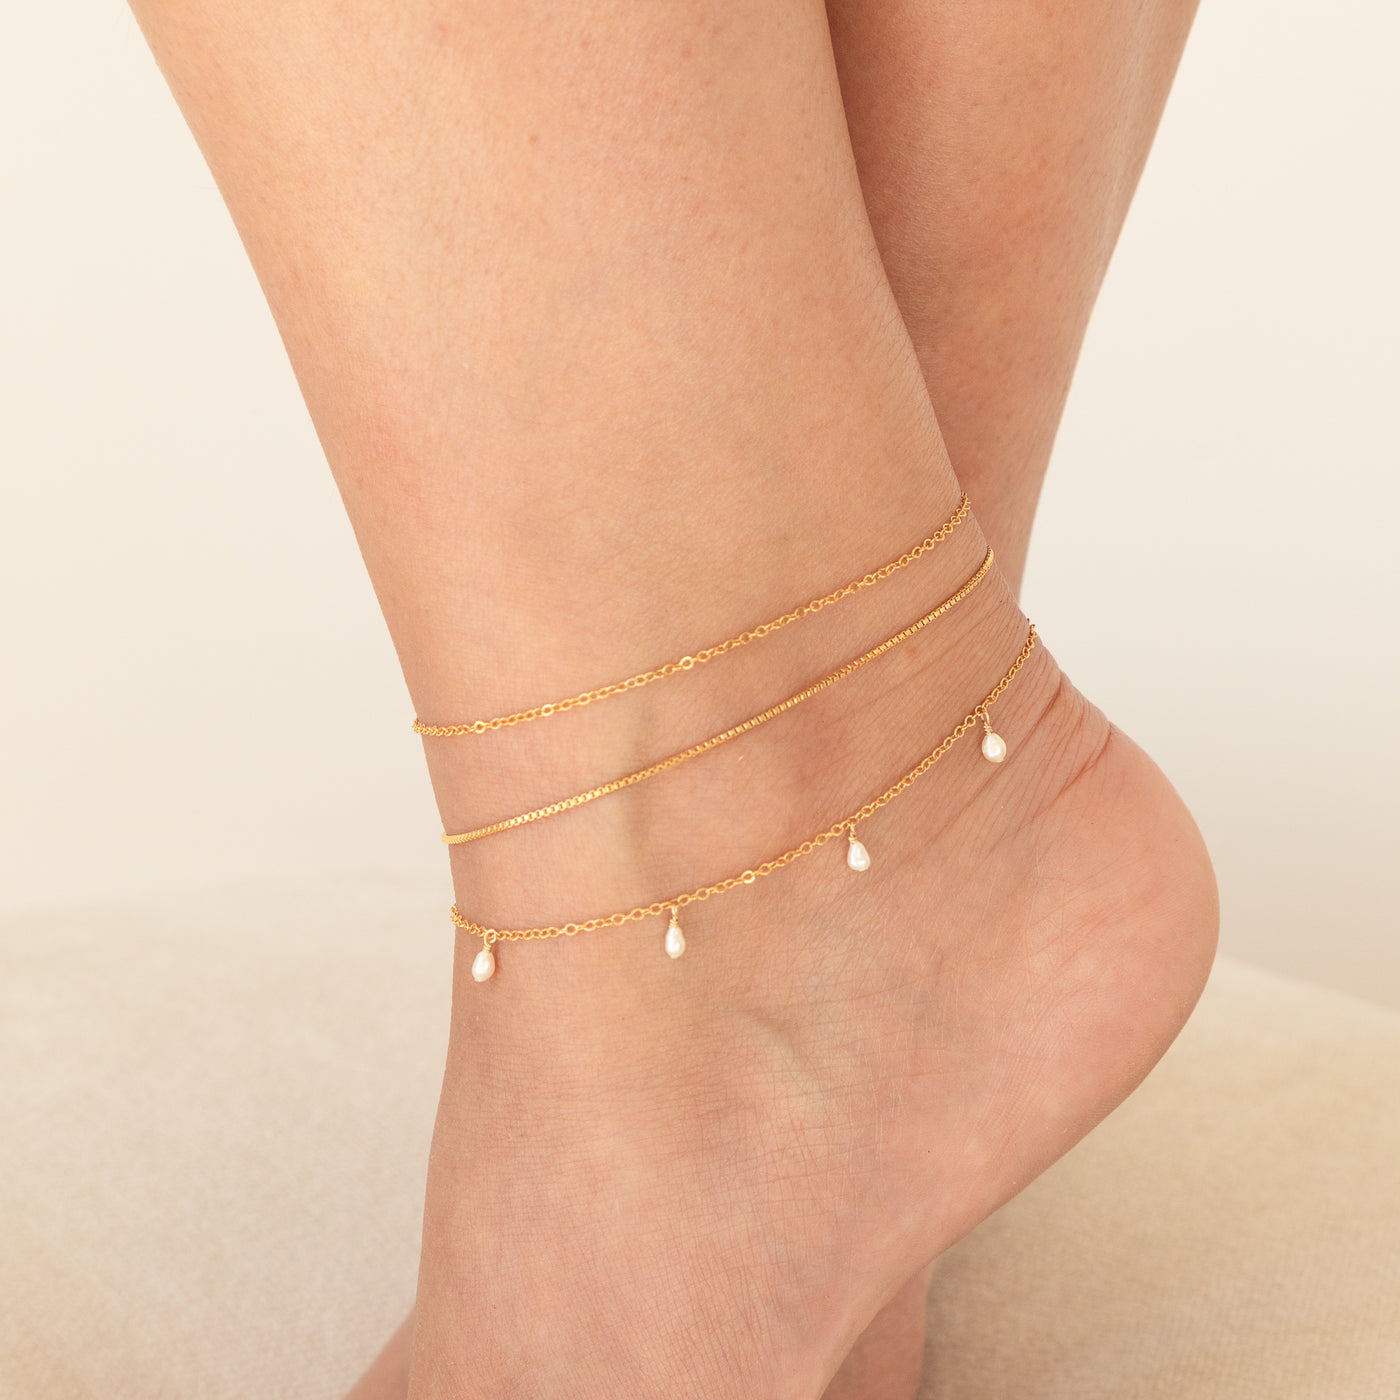 Dangling Pearl Anklet | Simple & Dainty Jewelry